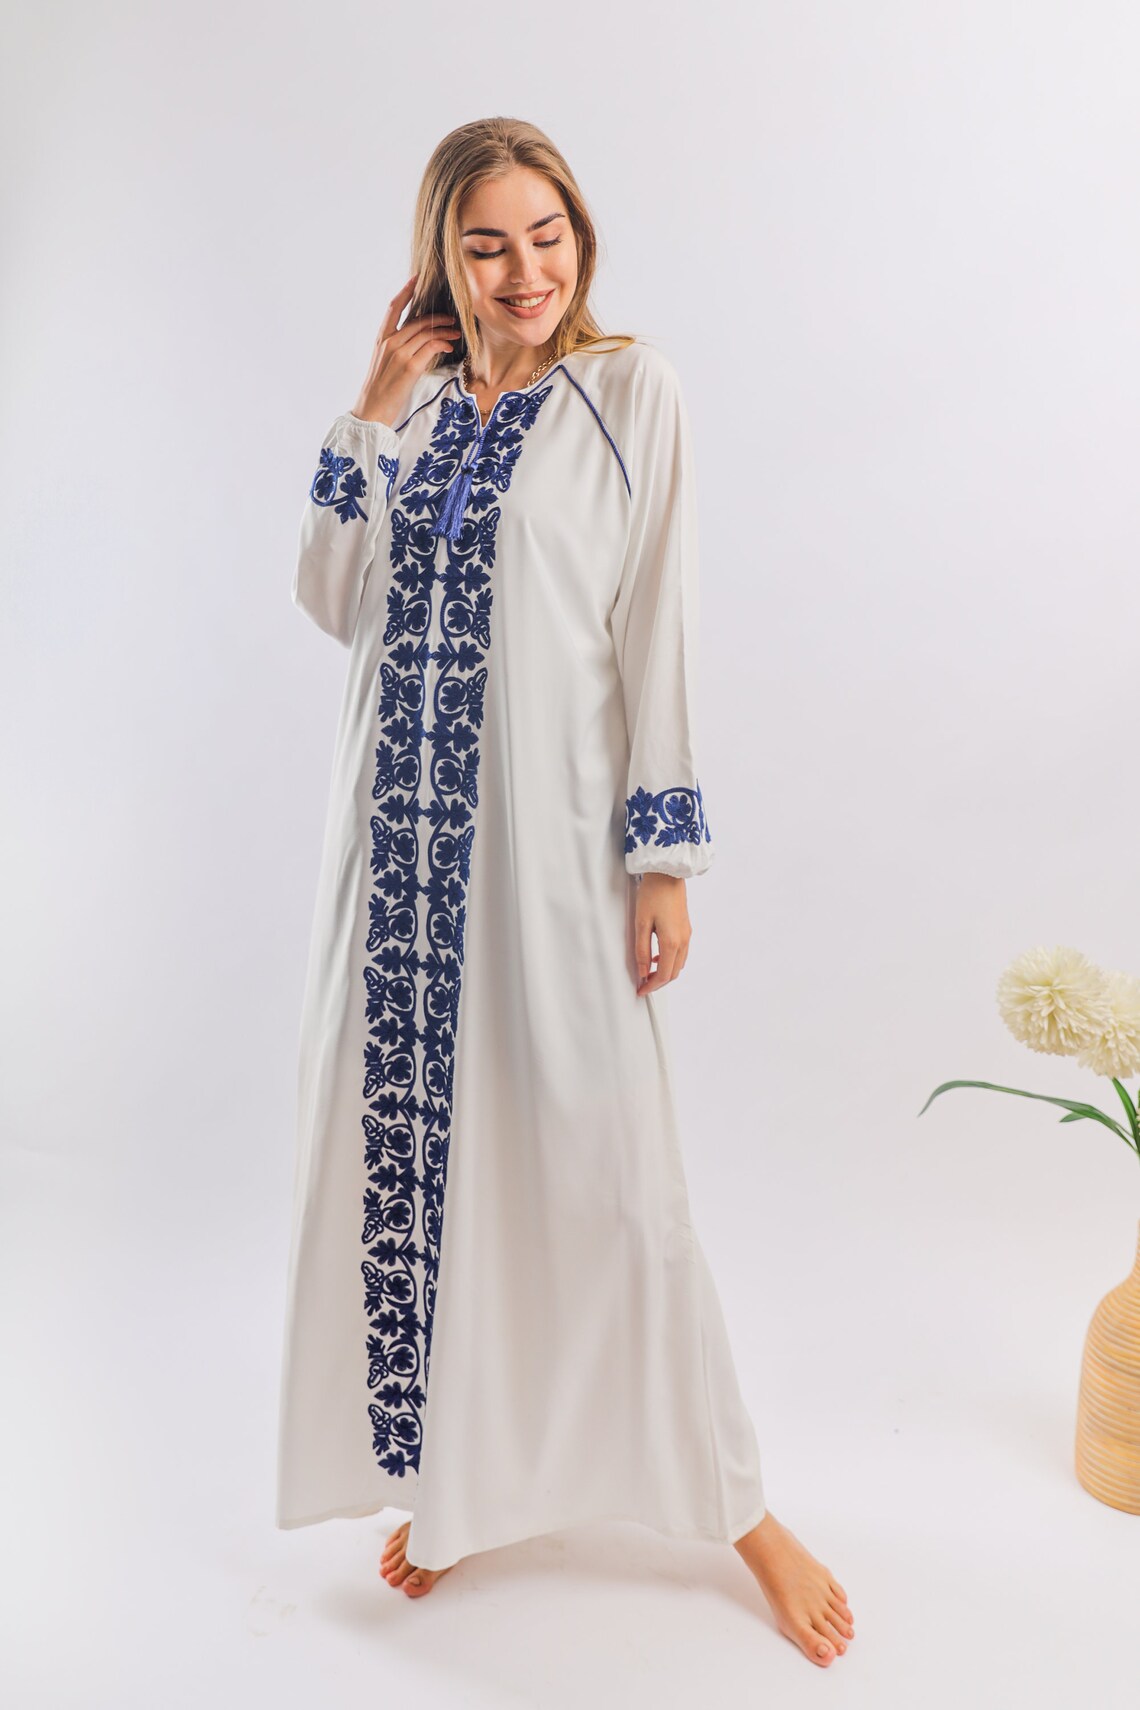 Royal White Embroidered Cotton Caftan Dress Caftans for - Etsy